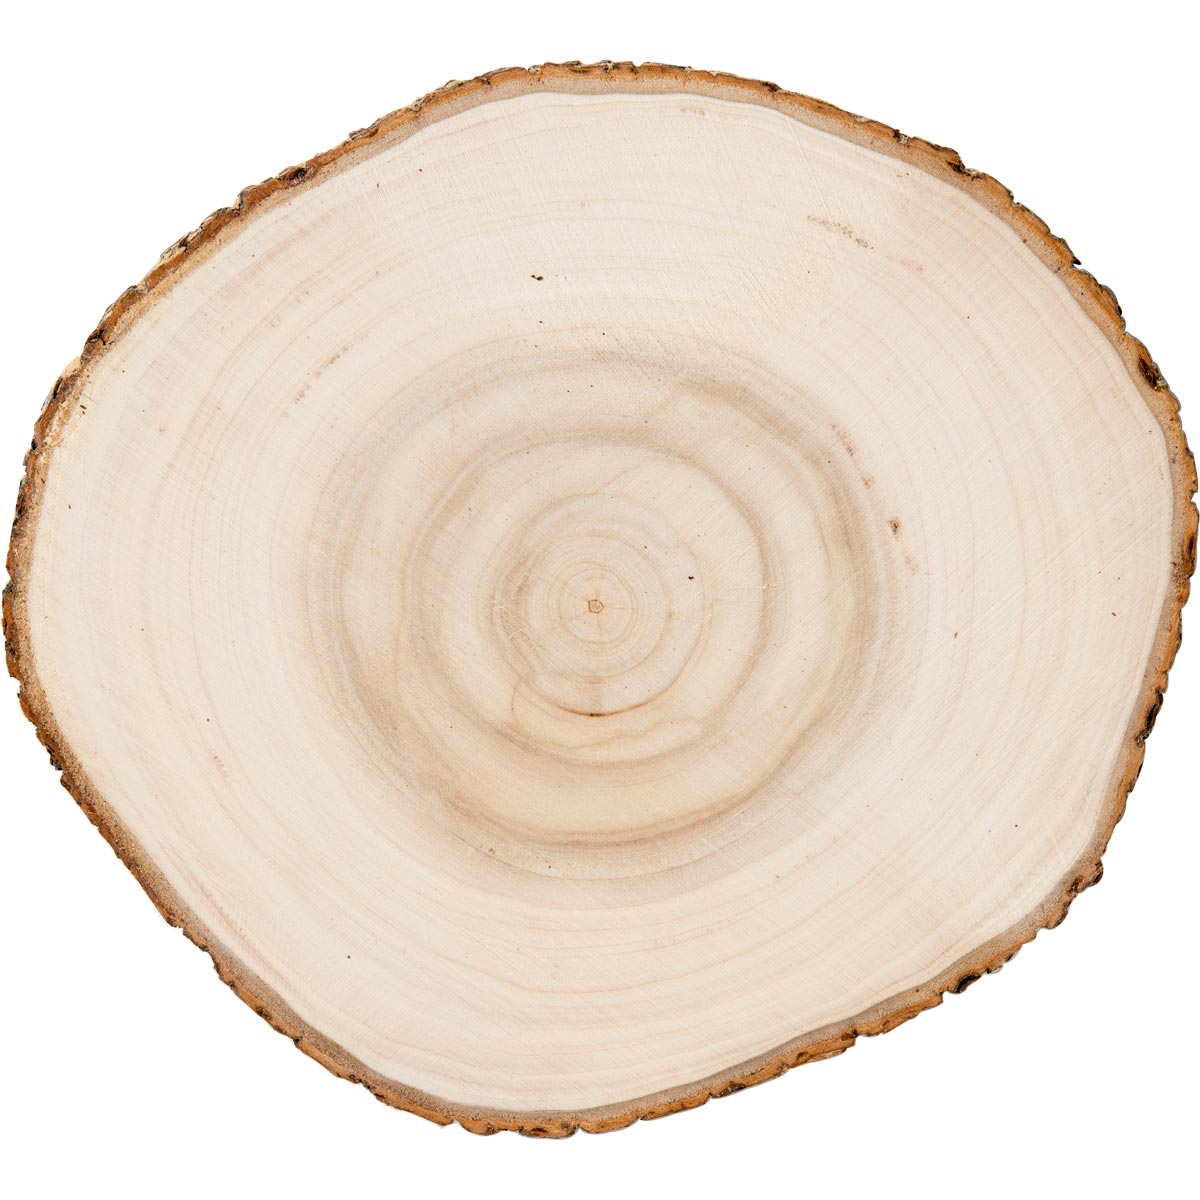 Plaid ® Wood Surfaces - Wood Round with Bark, 9